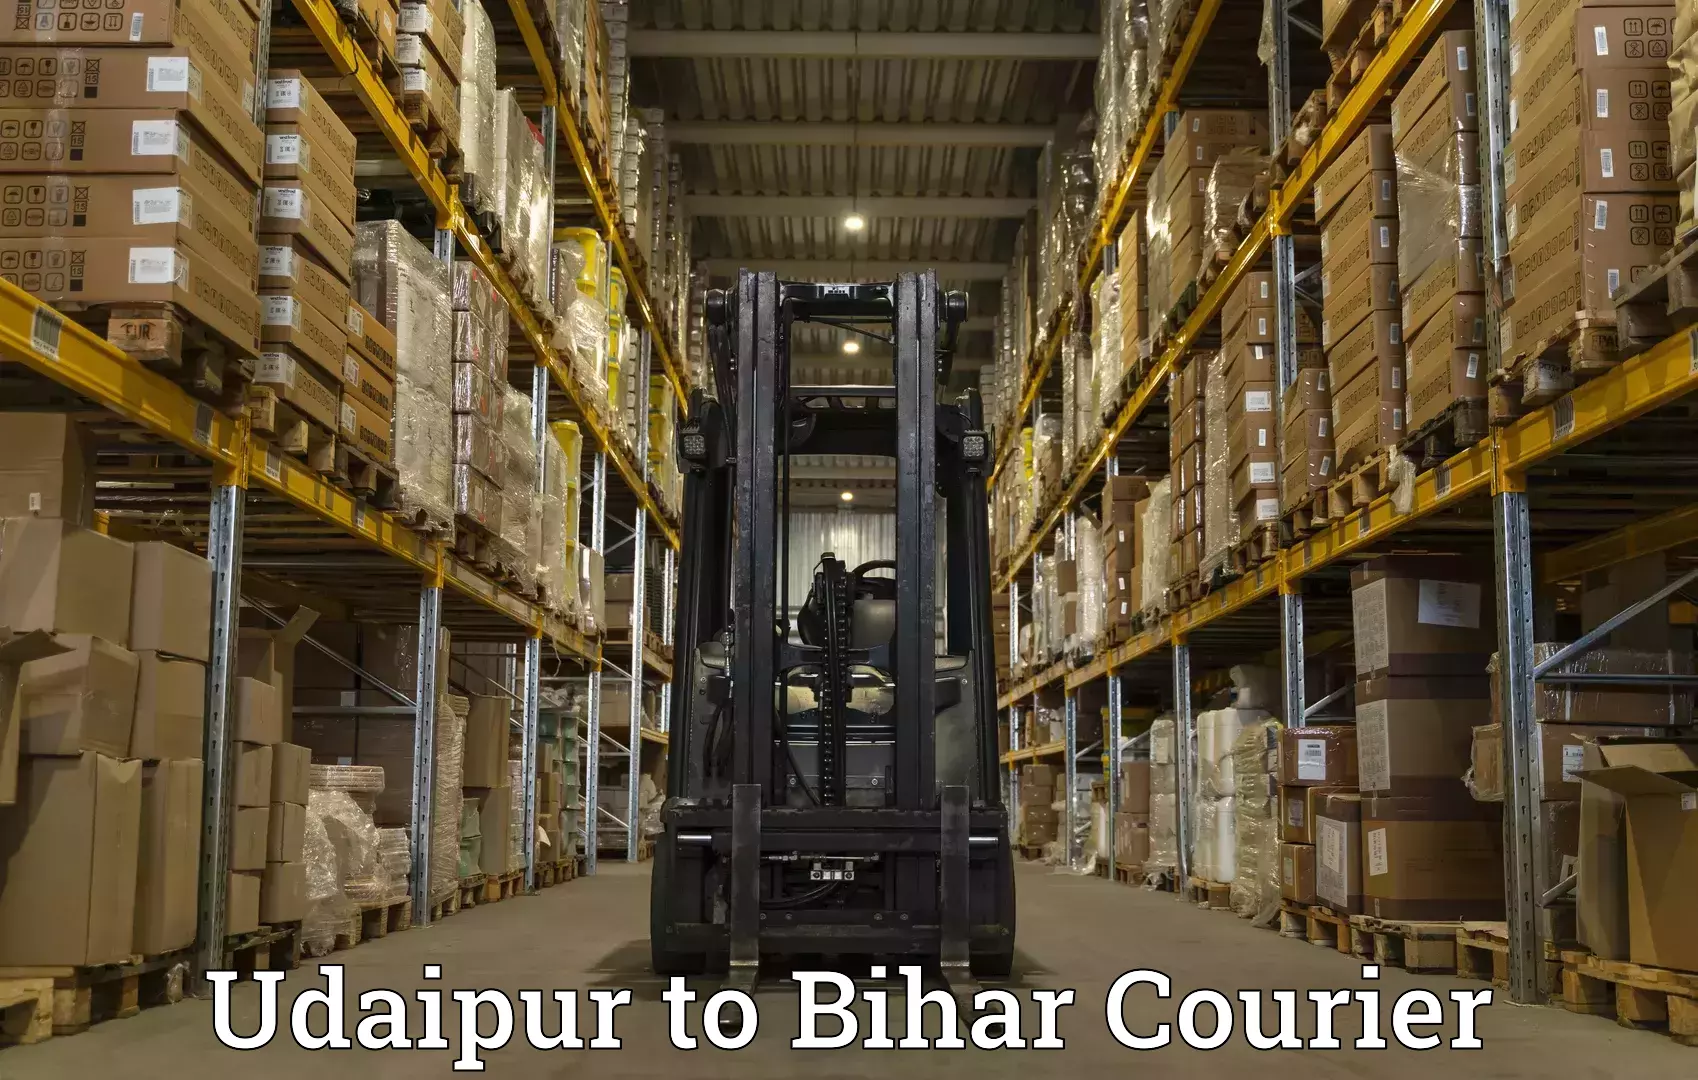 Express delivery network Udaipur to Bihar